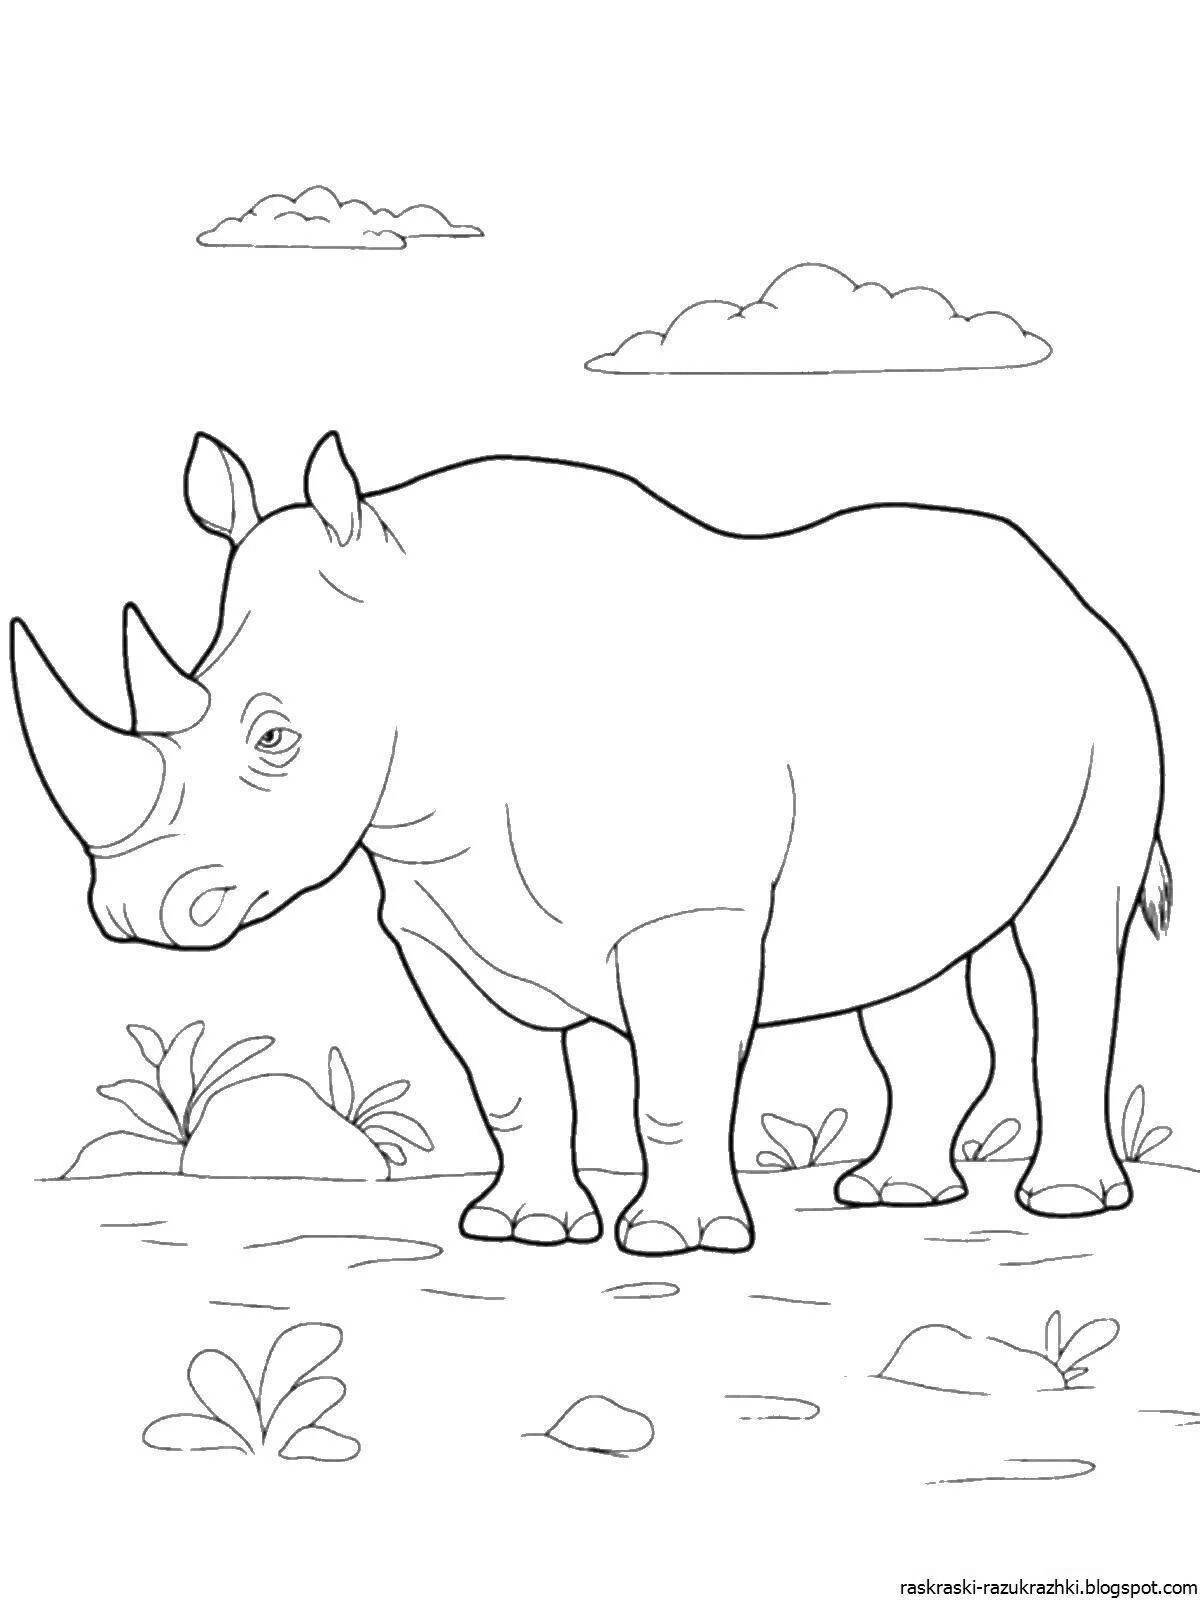 Delightful coloring pages animals of warm countries